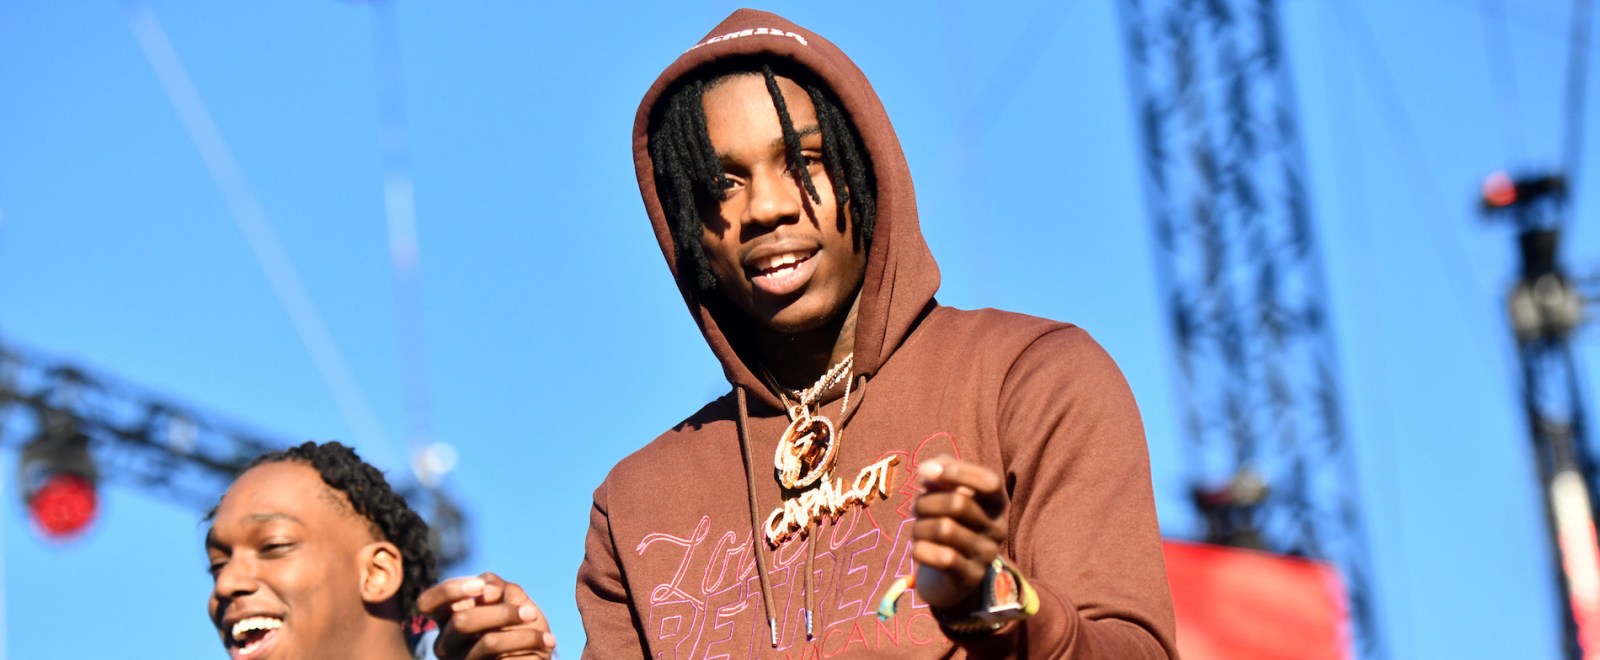 Polo G's “RAPSTAR” debuts at No.1 on the Billboard Hot 100